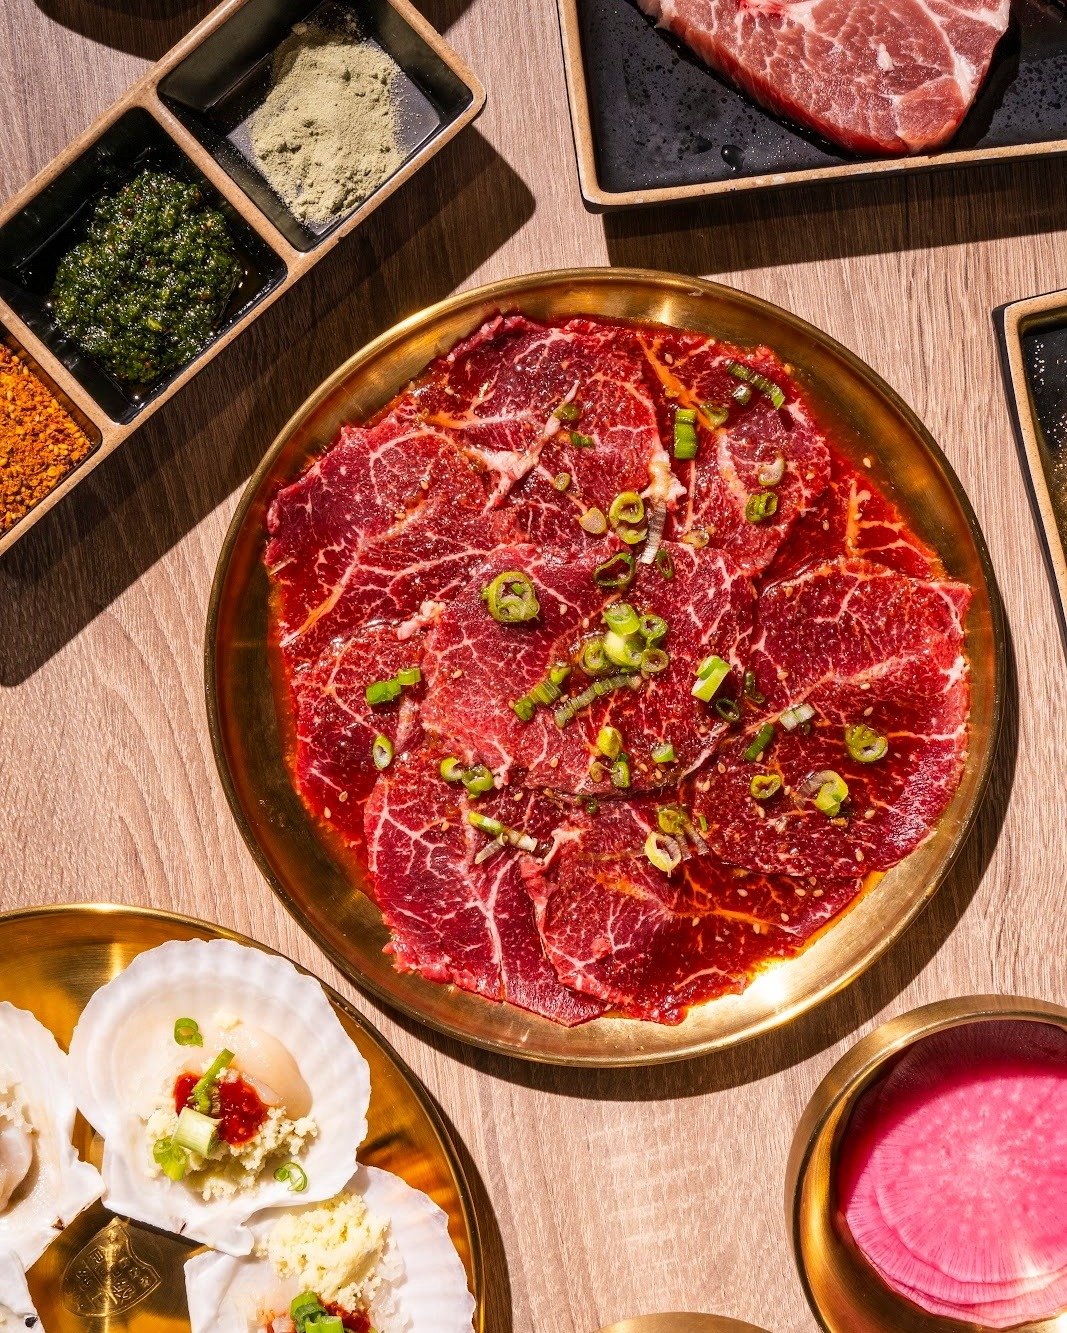 Get your grill on at 88Q! Tag your grill partner and join us today! 🔥

Long wait? No problem! Join our waitlist before you leave your home! 

Note: The waitlist opens once the restaurant opens.

🔗 88qkbbq.com/waitlist

#88qkbbq #meat #meatlover #br